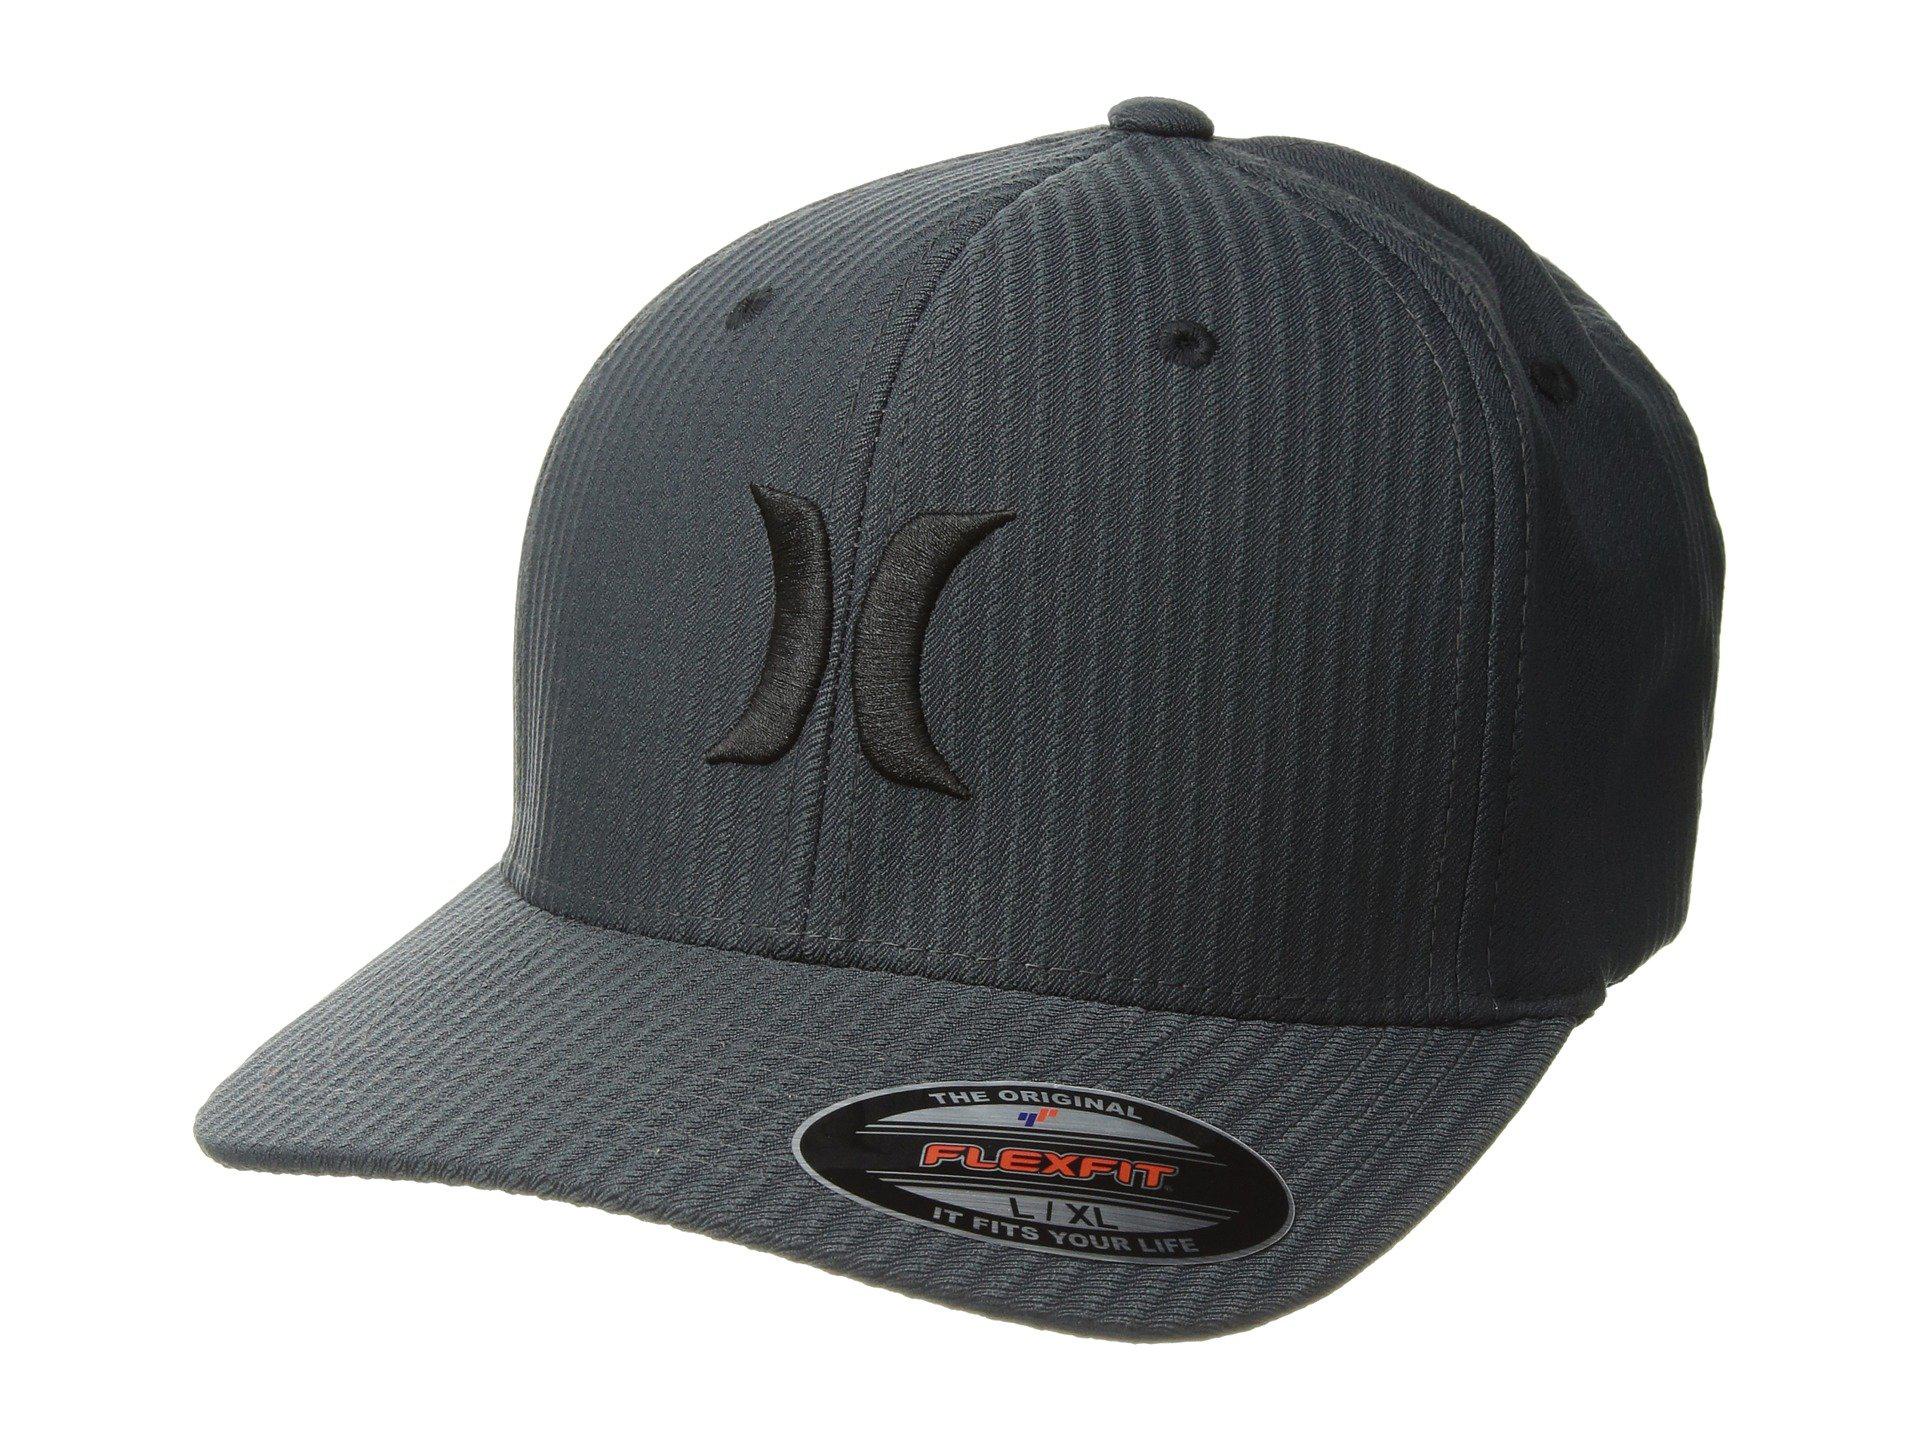 New Hurley One and Textures Flexfit Heather Blue Mens Cap Hat